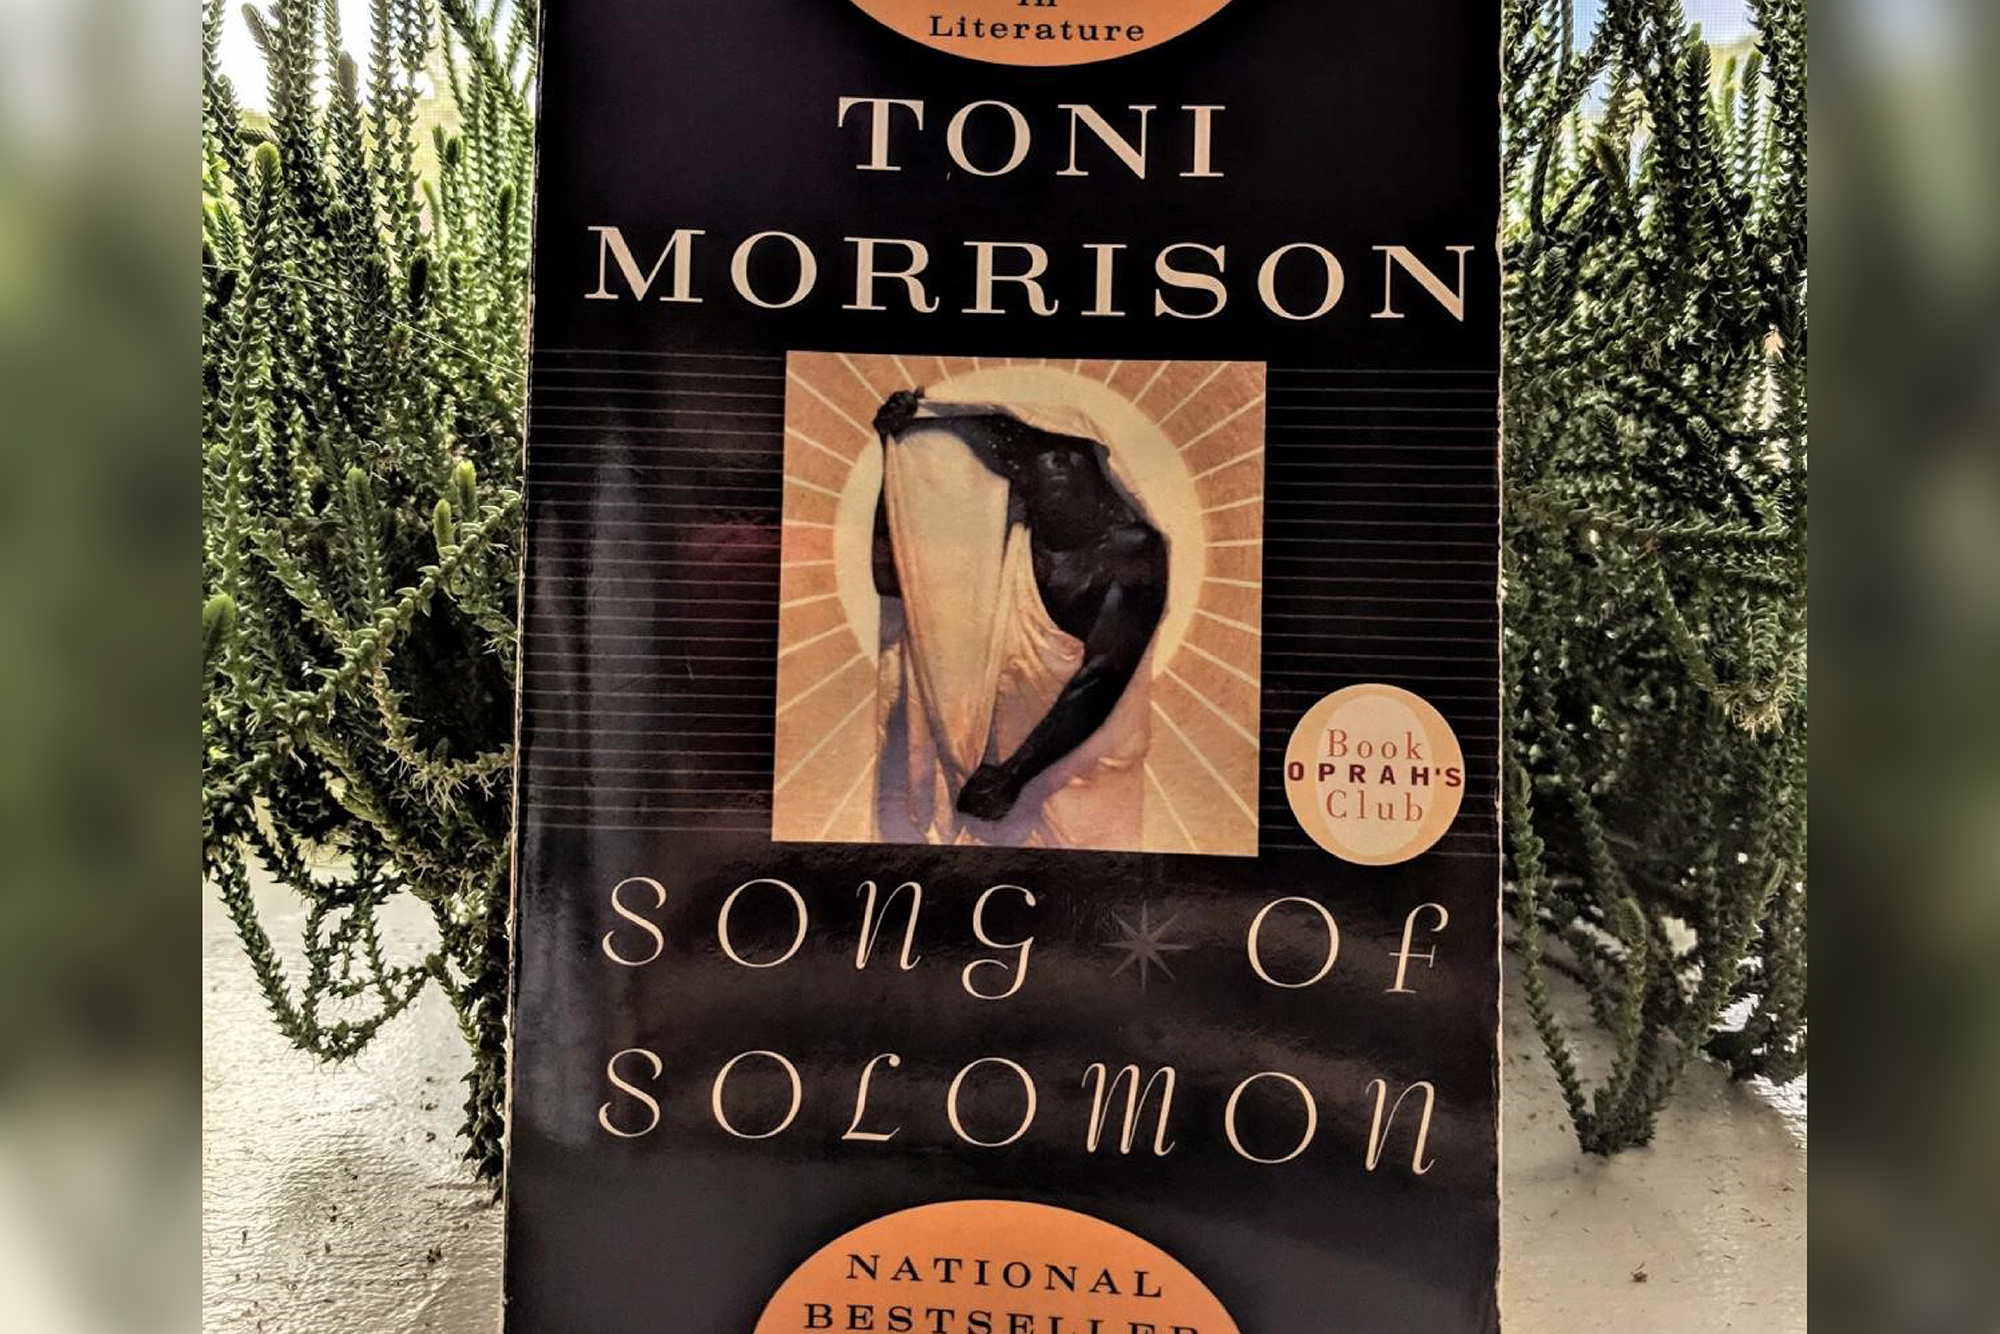 A copy of "Song of Solomon" by Toni Morrison